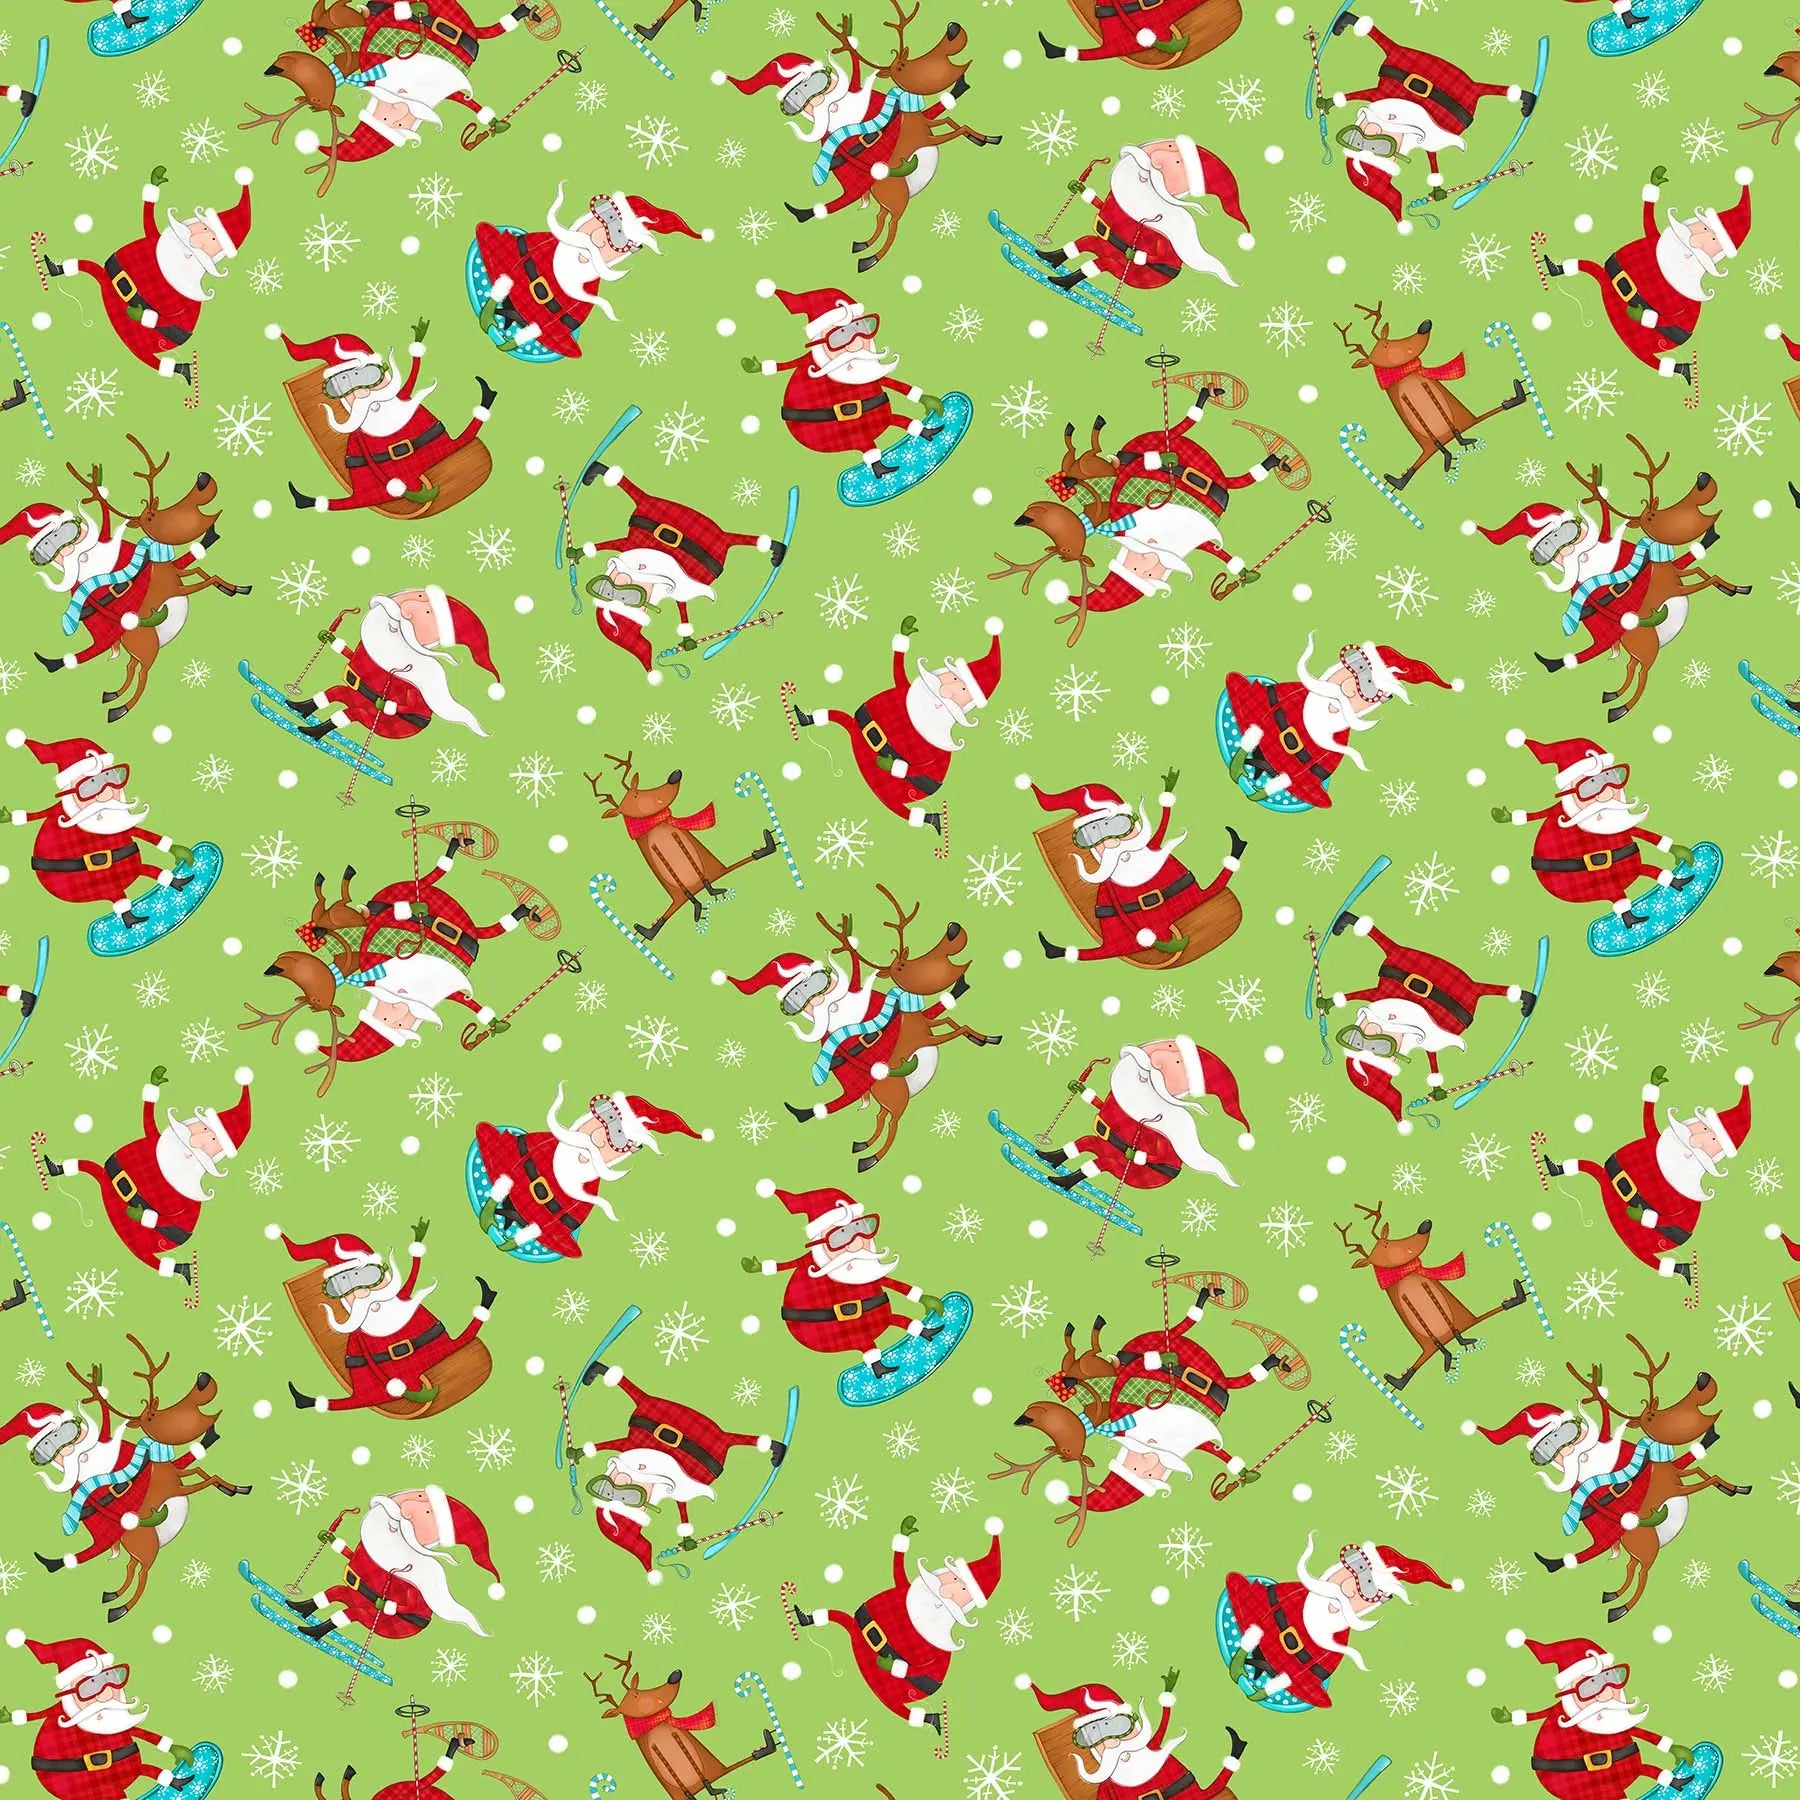 Green Background Extreme Santa Cotton Fabric per yard - Linda's Electric Quilters